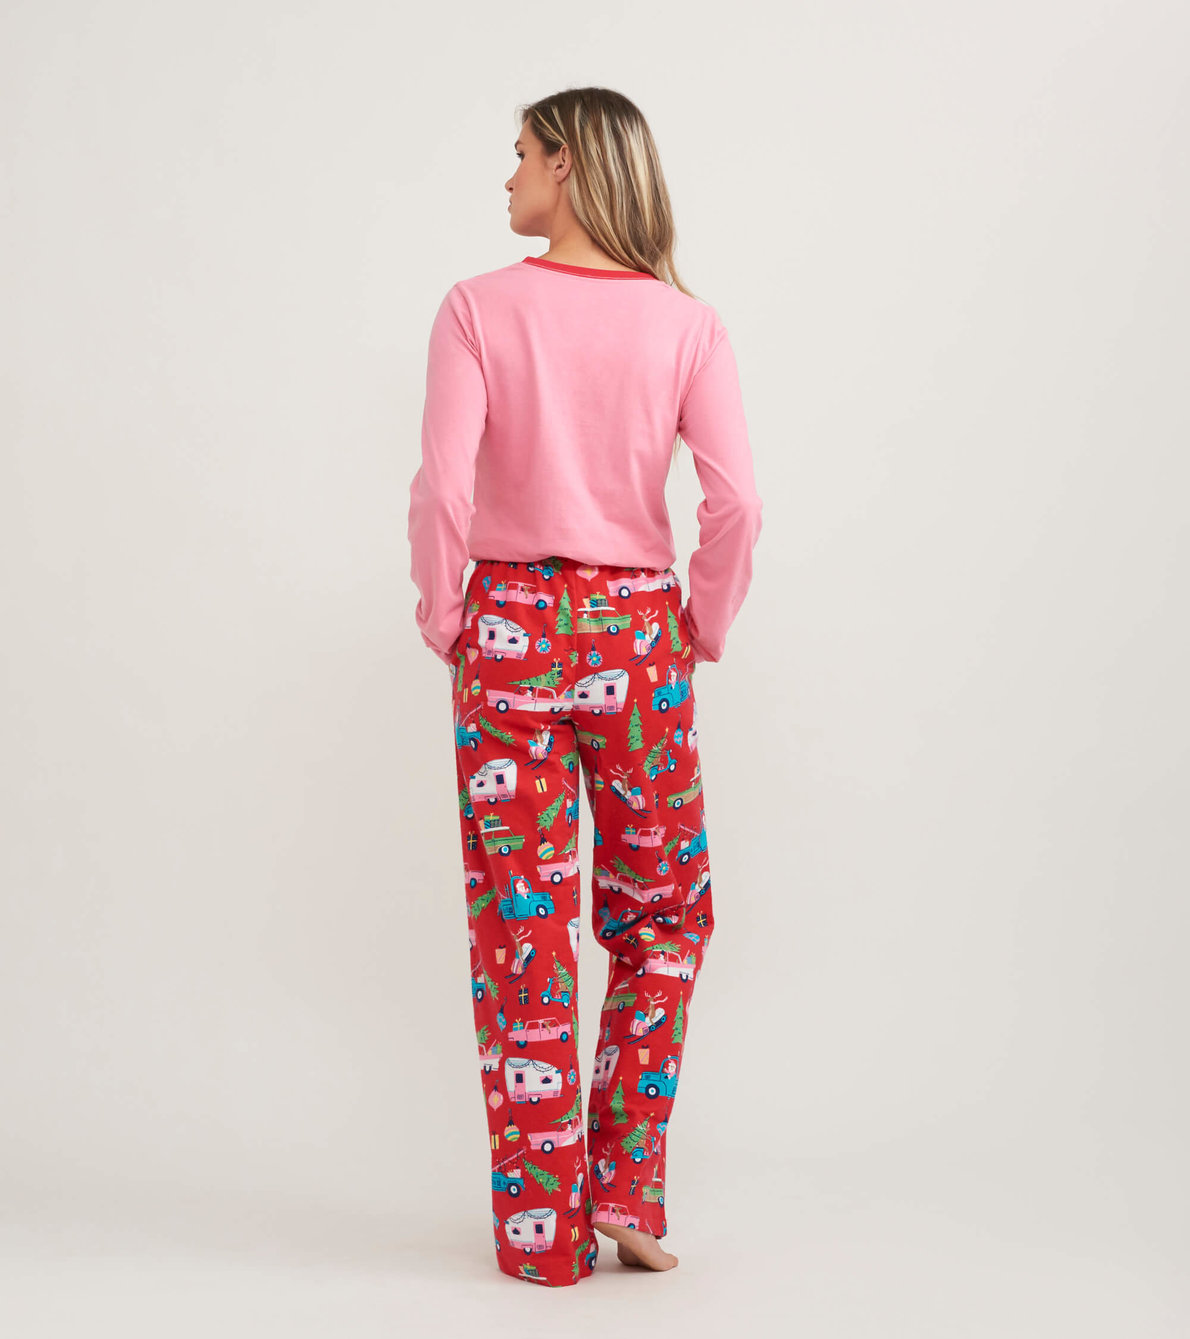 View larger image of Retro Christmas Women's Tee and Pants Pajama Separates